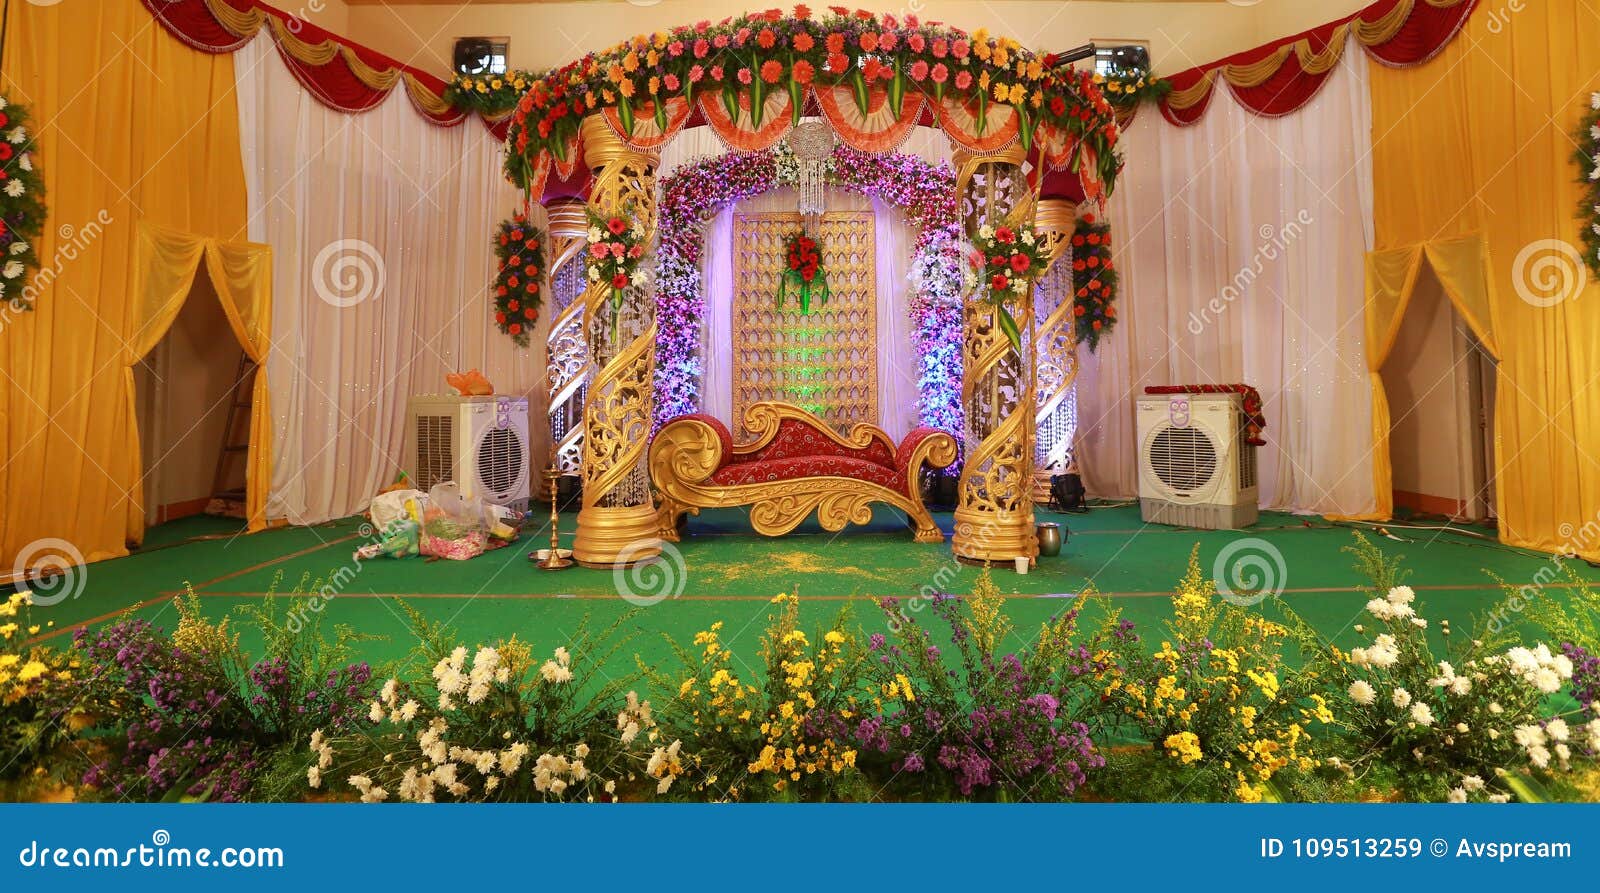 Wedding Stage Decoration with Flowers Stock Image - Image of entertainment,  ceremony: 109513259